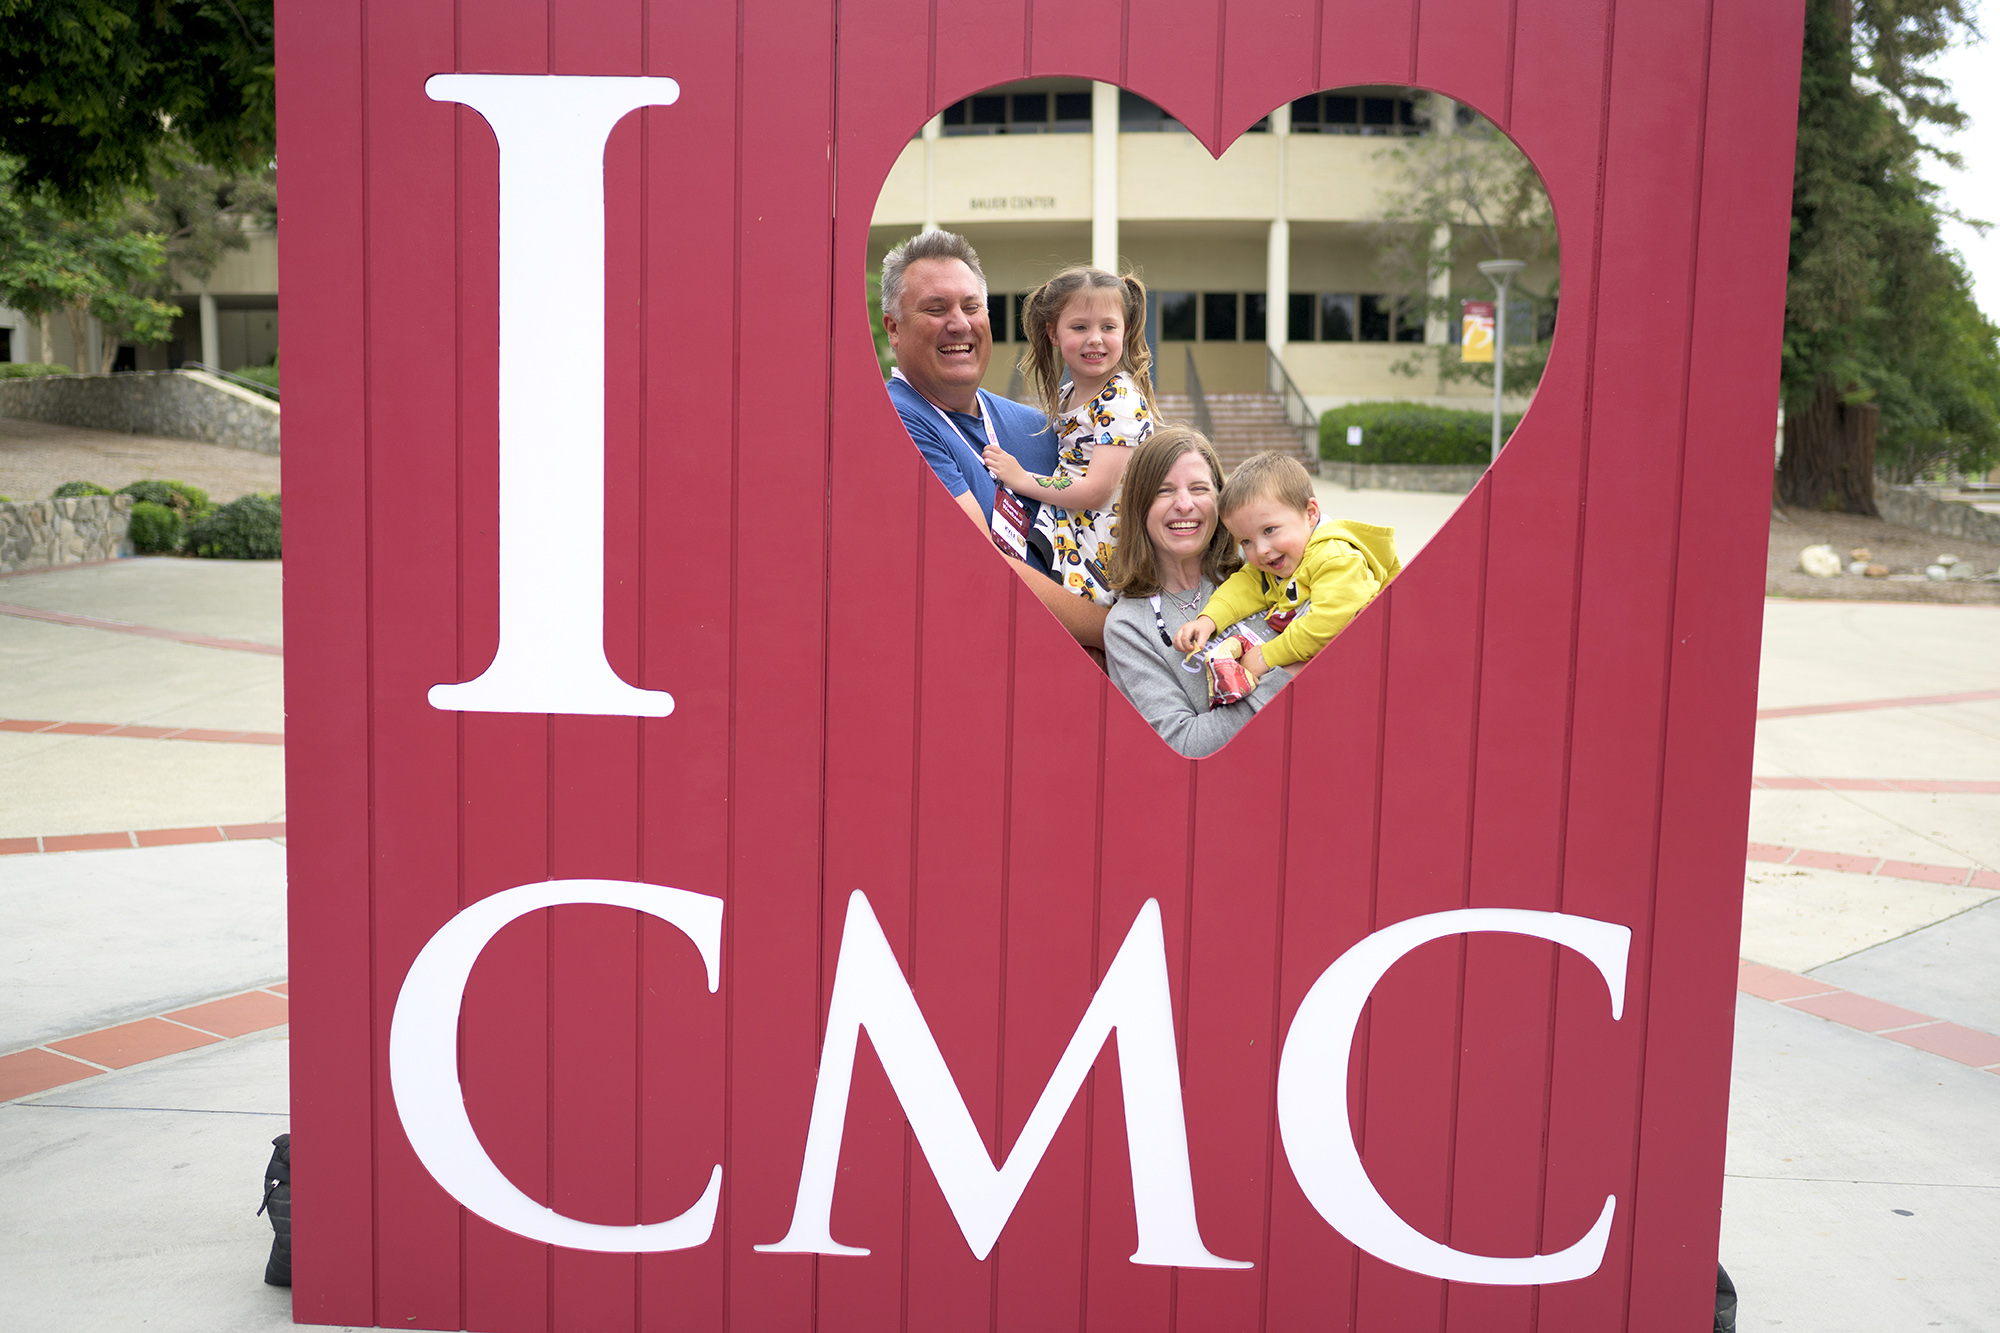 A family of alumni and their young children pose inside the heart-shaped cutout of the "I ♥︎ CMC" photo prop frame.